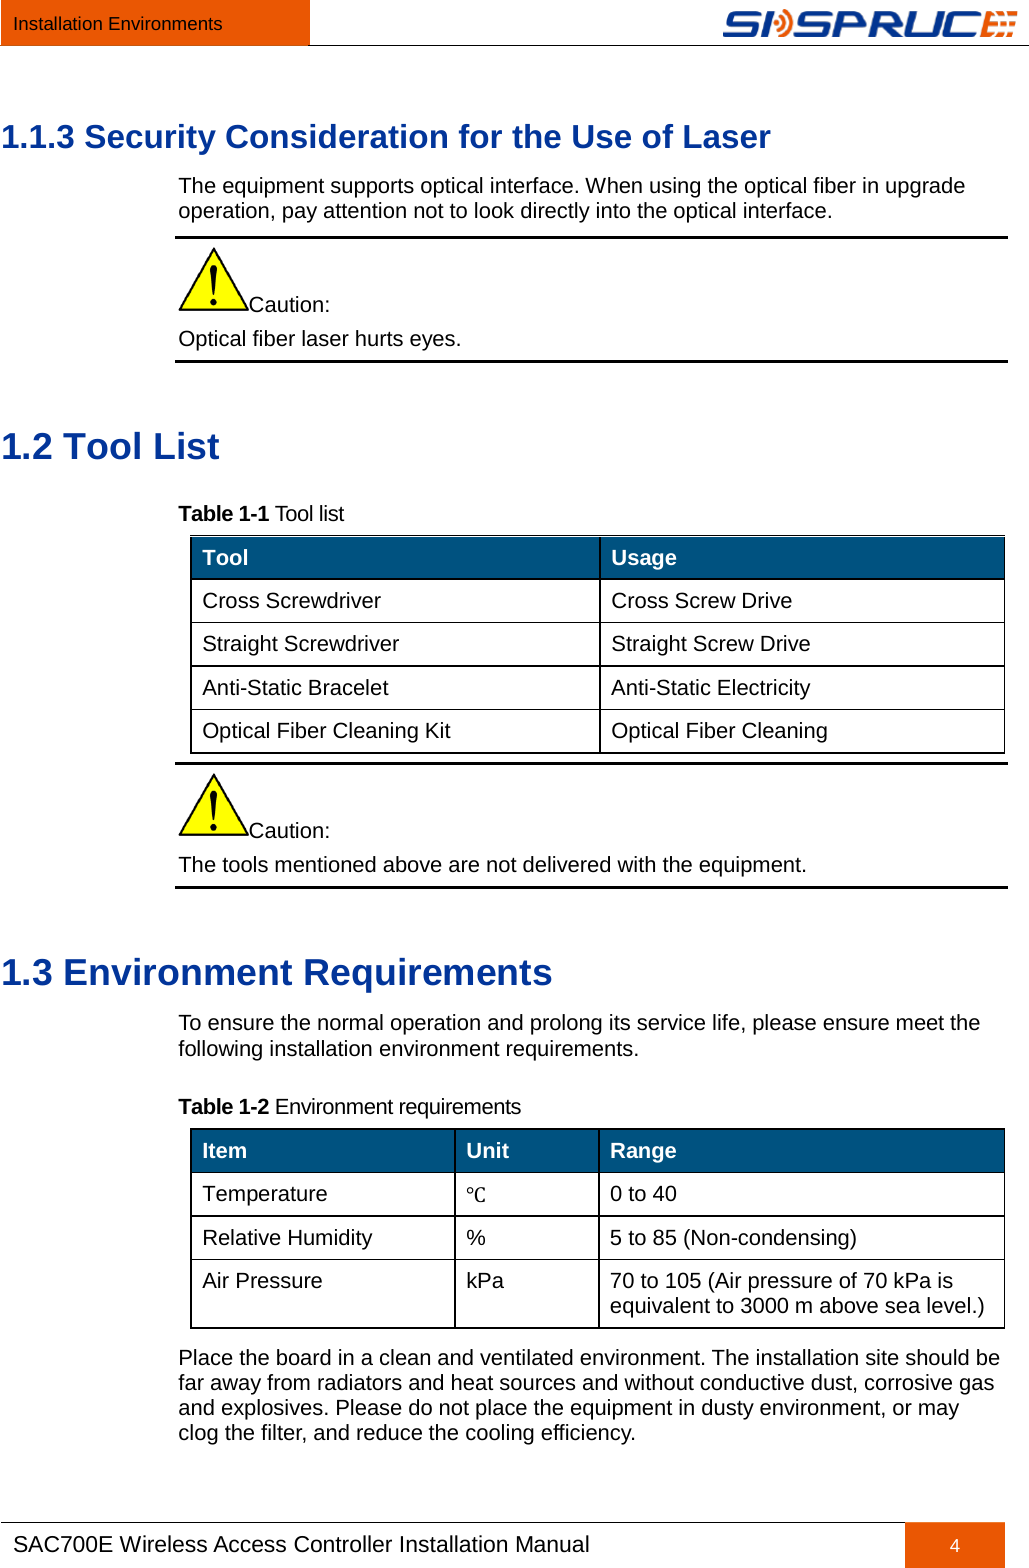 Installation Environments   SAC700E Wireless Access Controller Installation Manual 4  1.1.3 Security Consideration for the Use of Laser The equipment supports optical interface. When using the optical fiber in upgrade operation, pay attention not to look directly into the optical interface. Caution: Optical fiber laser hurts eyes. 1.2 Tool List Table 1-1 Tool list Tool Usage Cross Screwdriver Cross Screw Drive Straight Screwdriver Straight Screw Drive Anti-Static Bracelet Anti-Static Electricity Optical Fiber Cleaning Kit Optical Fiber Cleaning Caution: The tools mentioned above are not delivered with the equipment. 1.3 Environment Requirements To ensure the normal operation and prolong its service life, please ensure meet the following installation environment requirements. Table 1-2 Environment requirements Item Unit Range Temperature ℃ 0 to 40 Relative Humidity  %  5 to 85 (Non-condensing) Air Pressure  kPa  70 to 105 (Air pressure of 70 kPa is equivalent to 3000 m above sea level.) Place the board in a clean and ventilated environment. The installation site should be far away from radiators and heat sources and without conductive dust, corrosive gas and explosives. Please do not place the equipment in dusty environment, or may clog the filter, and reduce the cooling efficiency. 